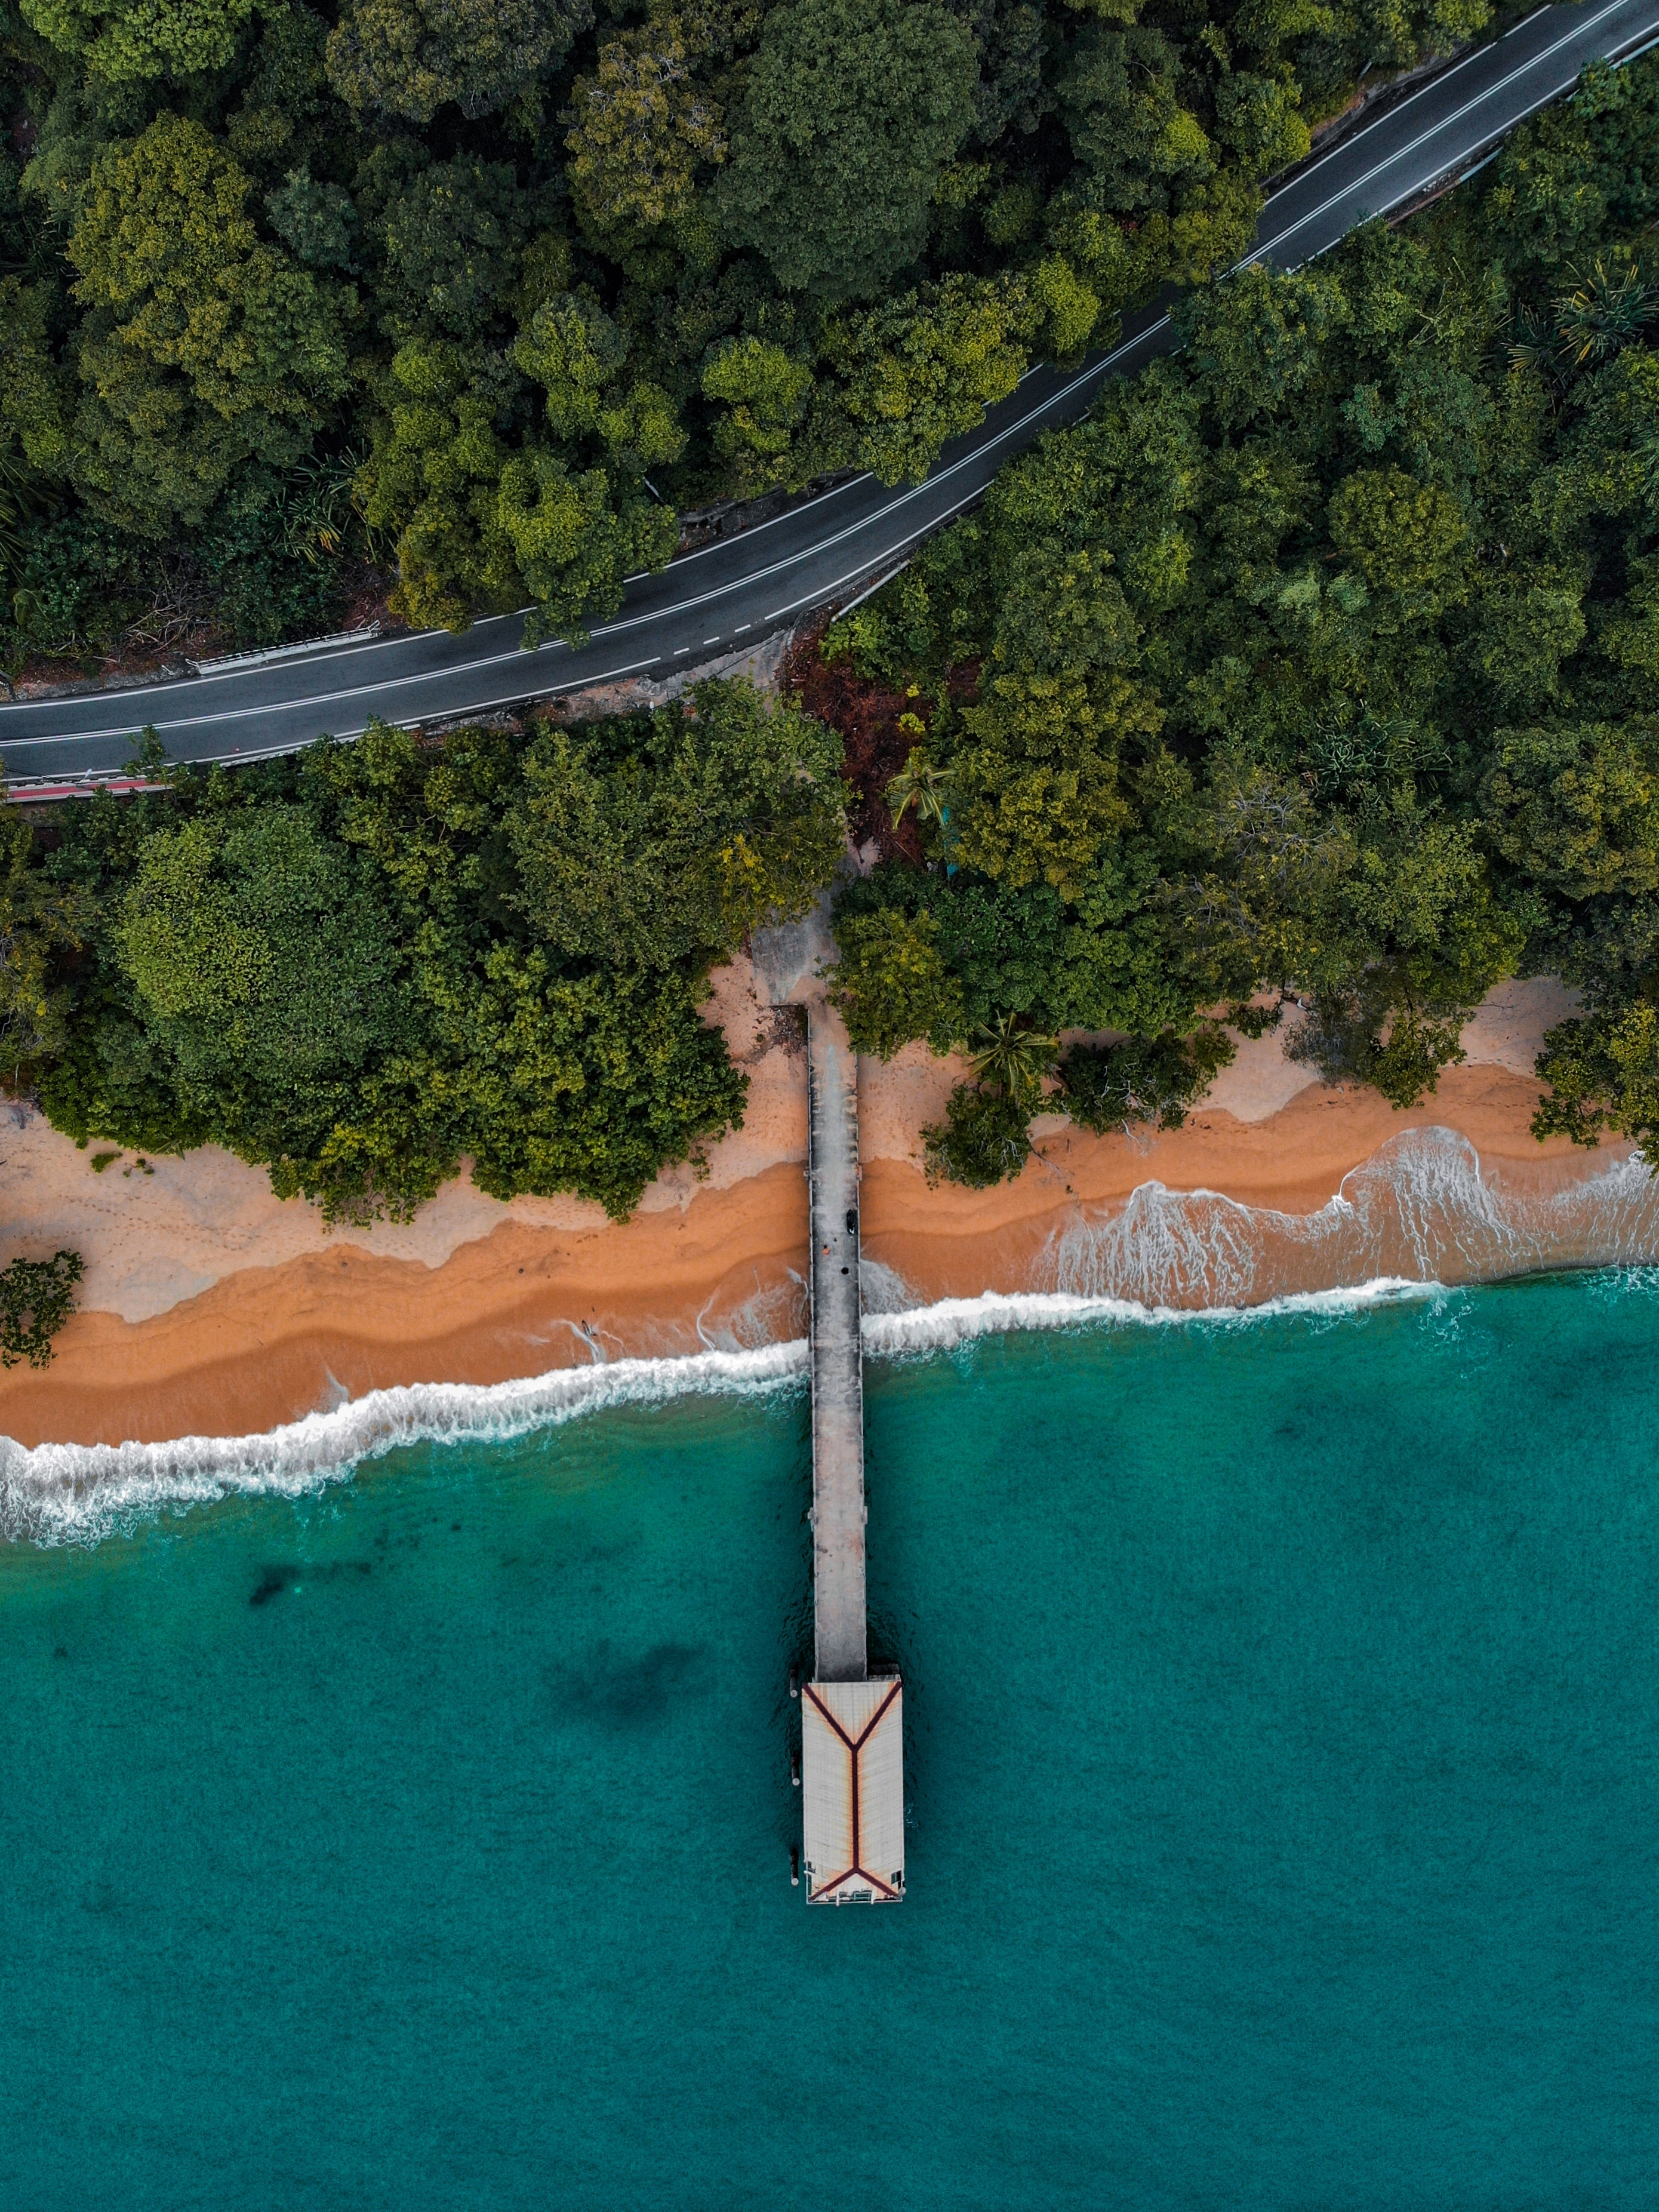 view from above, nature, trees, coast, pier, bungalow iphone wallpaper